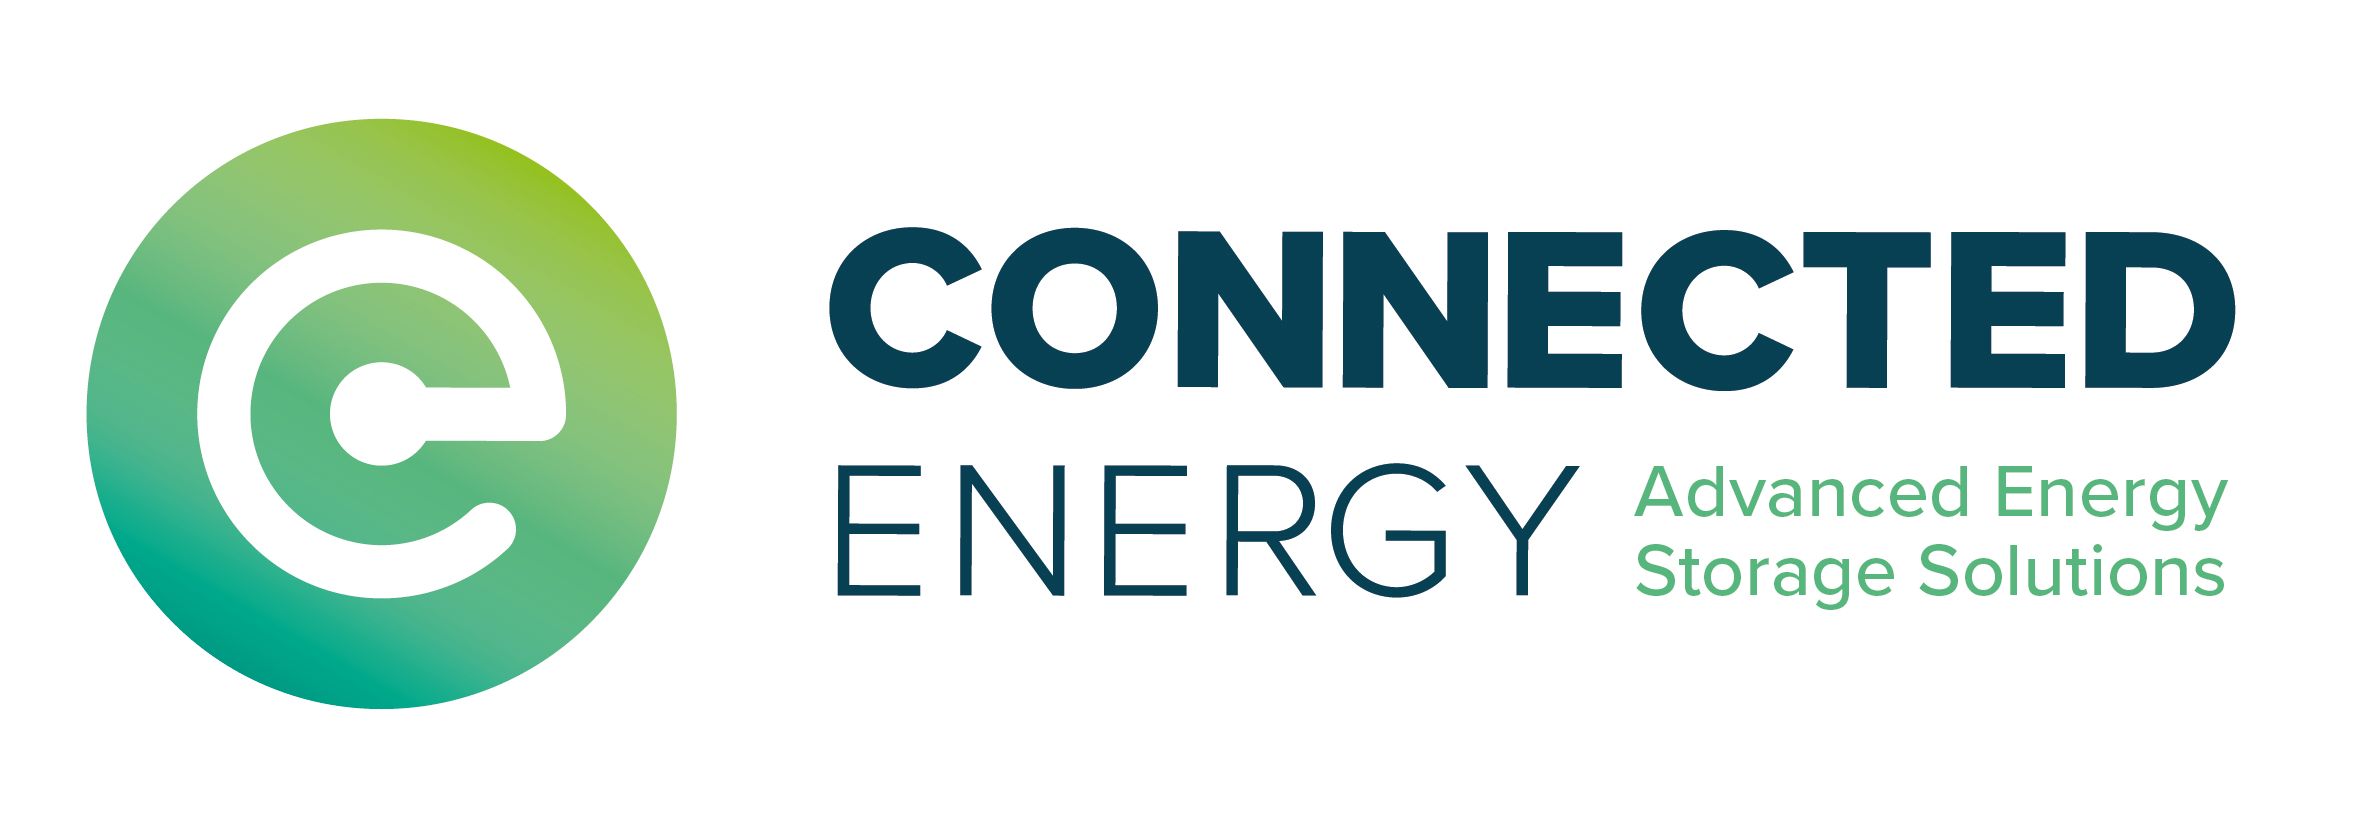 Connected Energy Limited